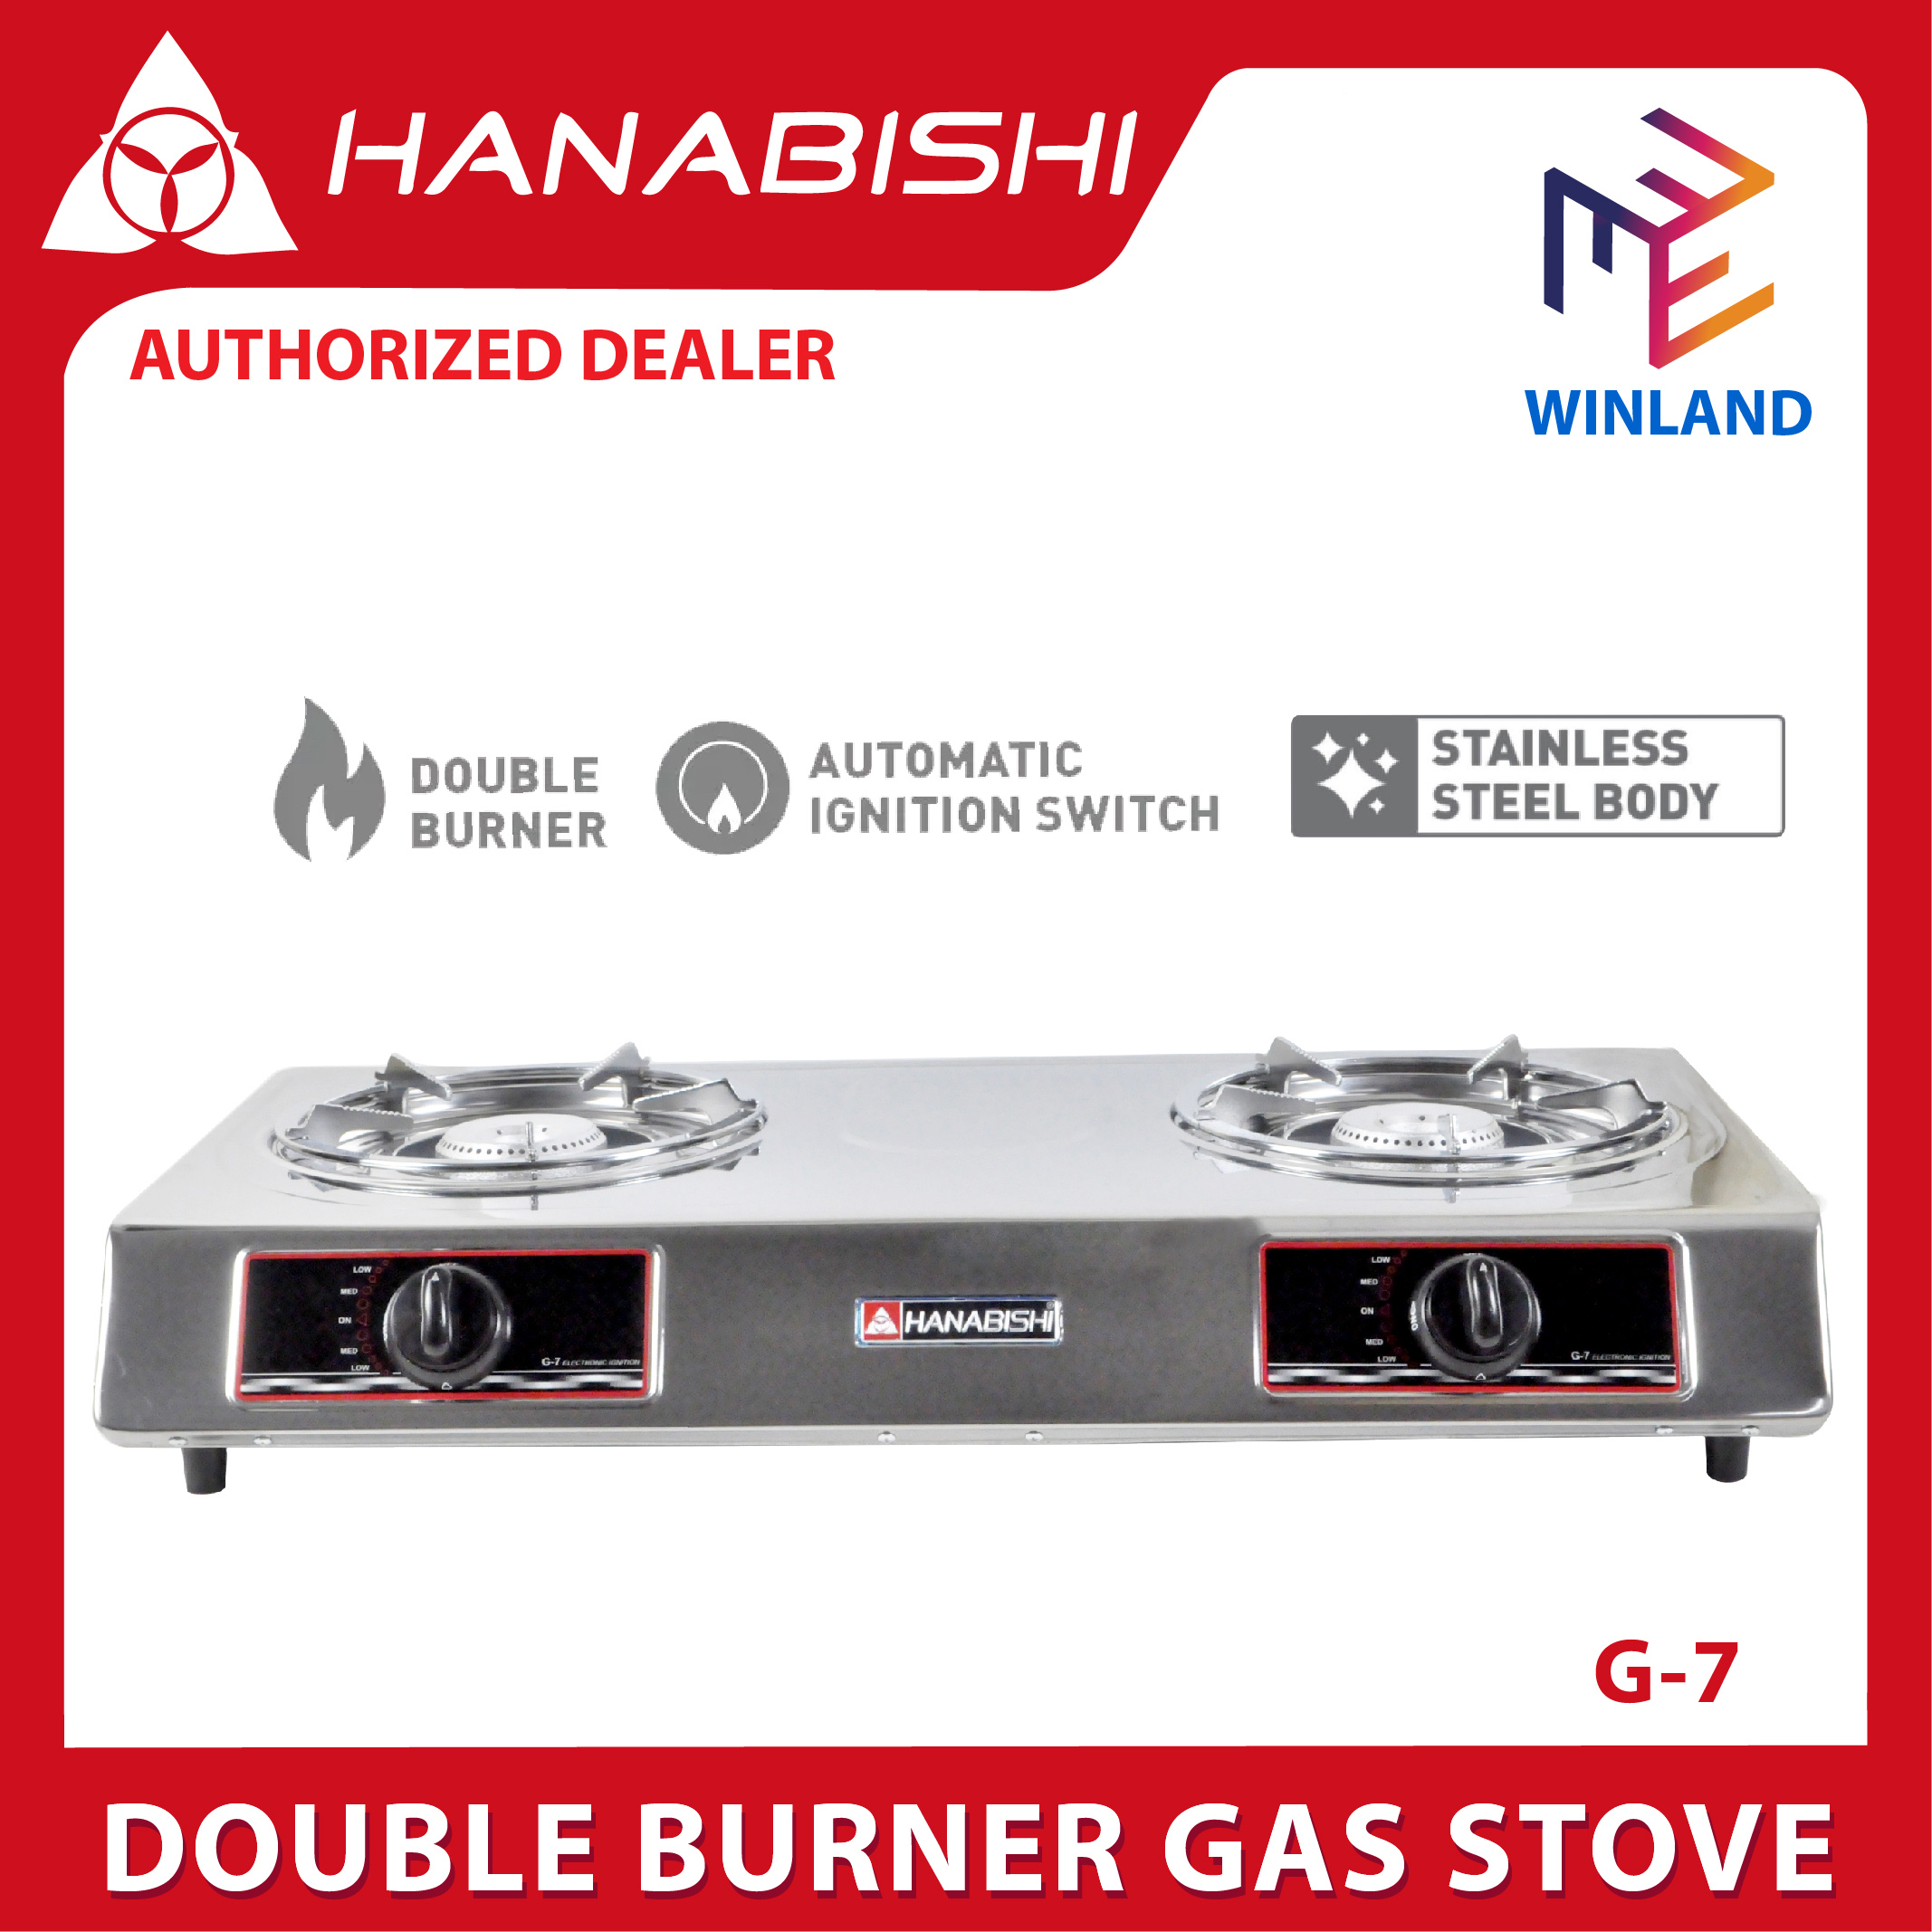 Winland Stainless Steel Double Burner Gas Stove G-7